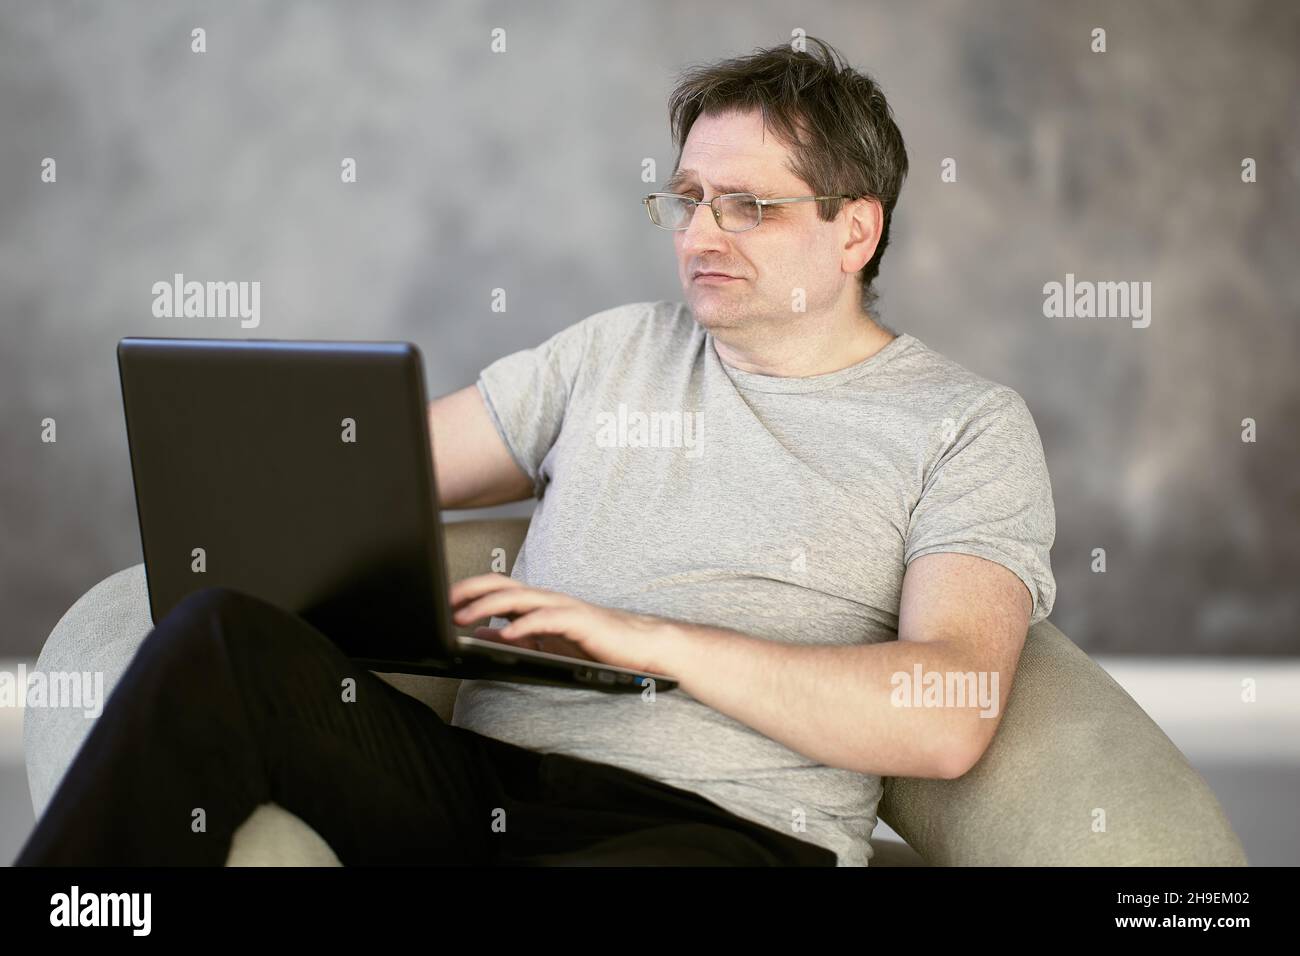 Presbyopia in 52 year old man working from home during lockdown due to coronavirus. Stock Photo